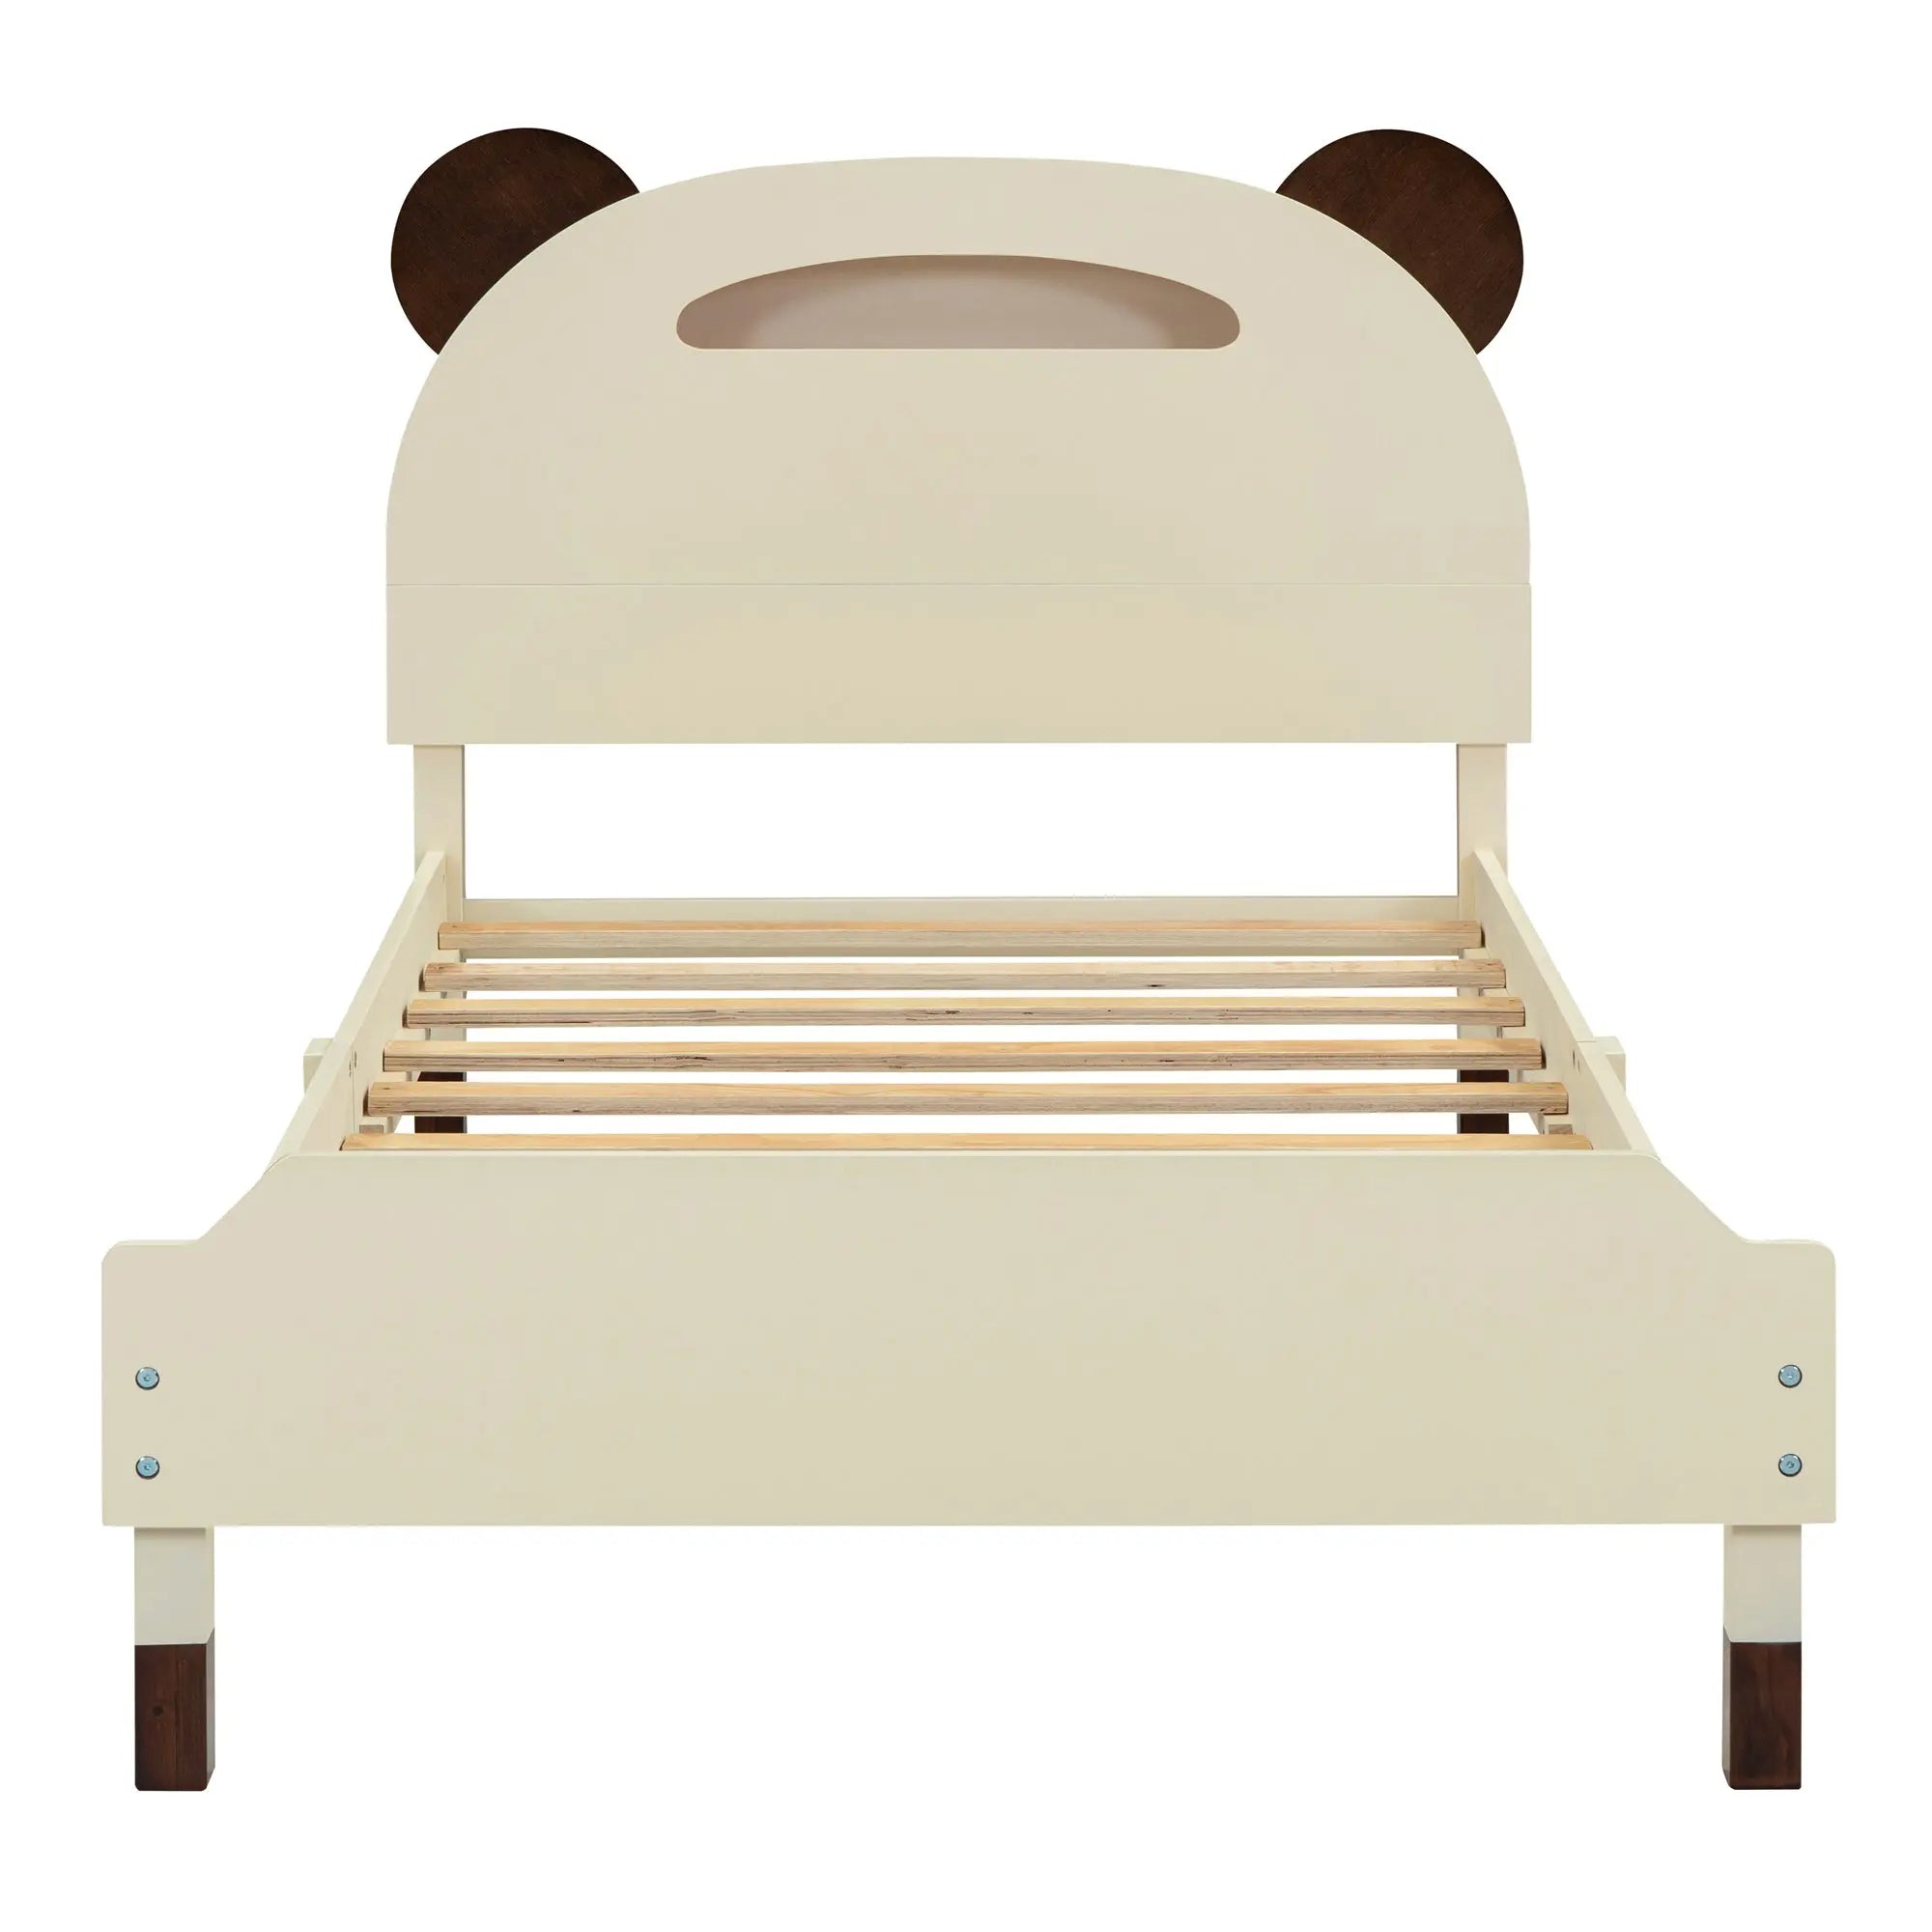 Bellemave Wood Platform Bed with Bear-shaped Headboard,Bed with Motion Activated Night Lights Bellemave